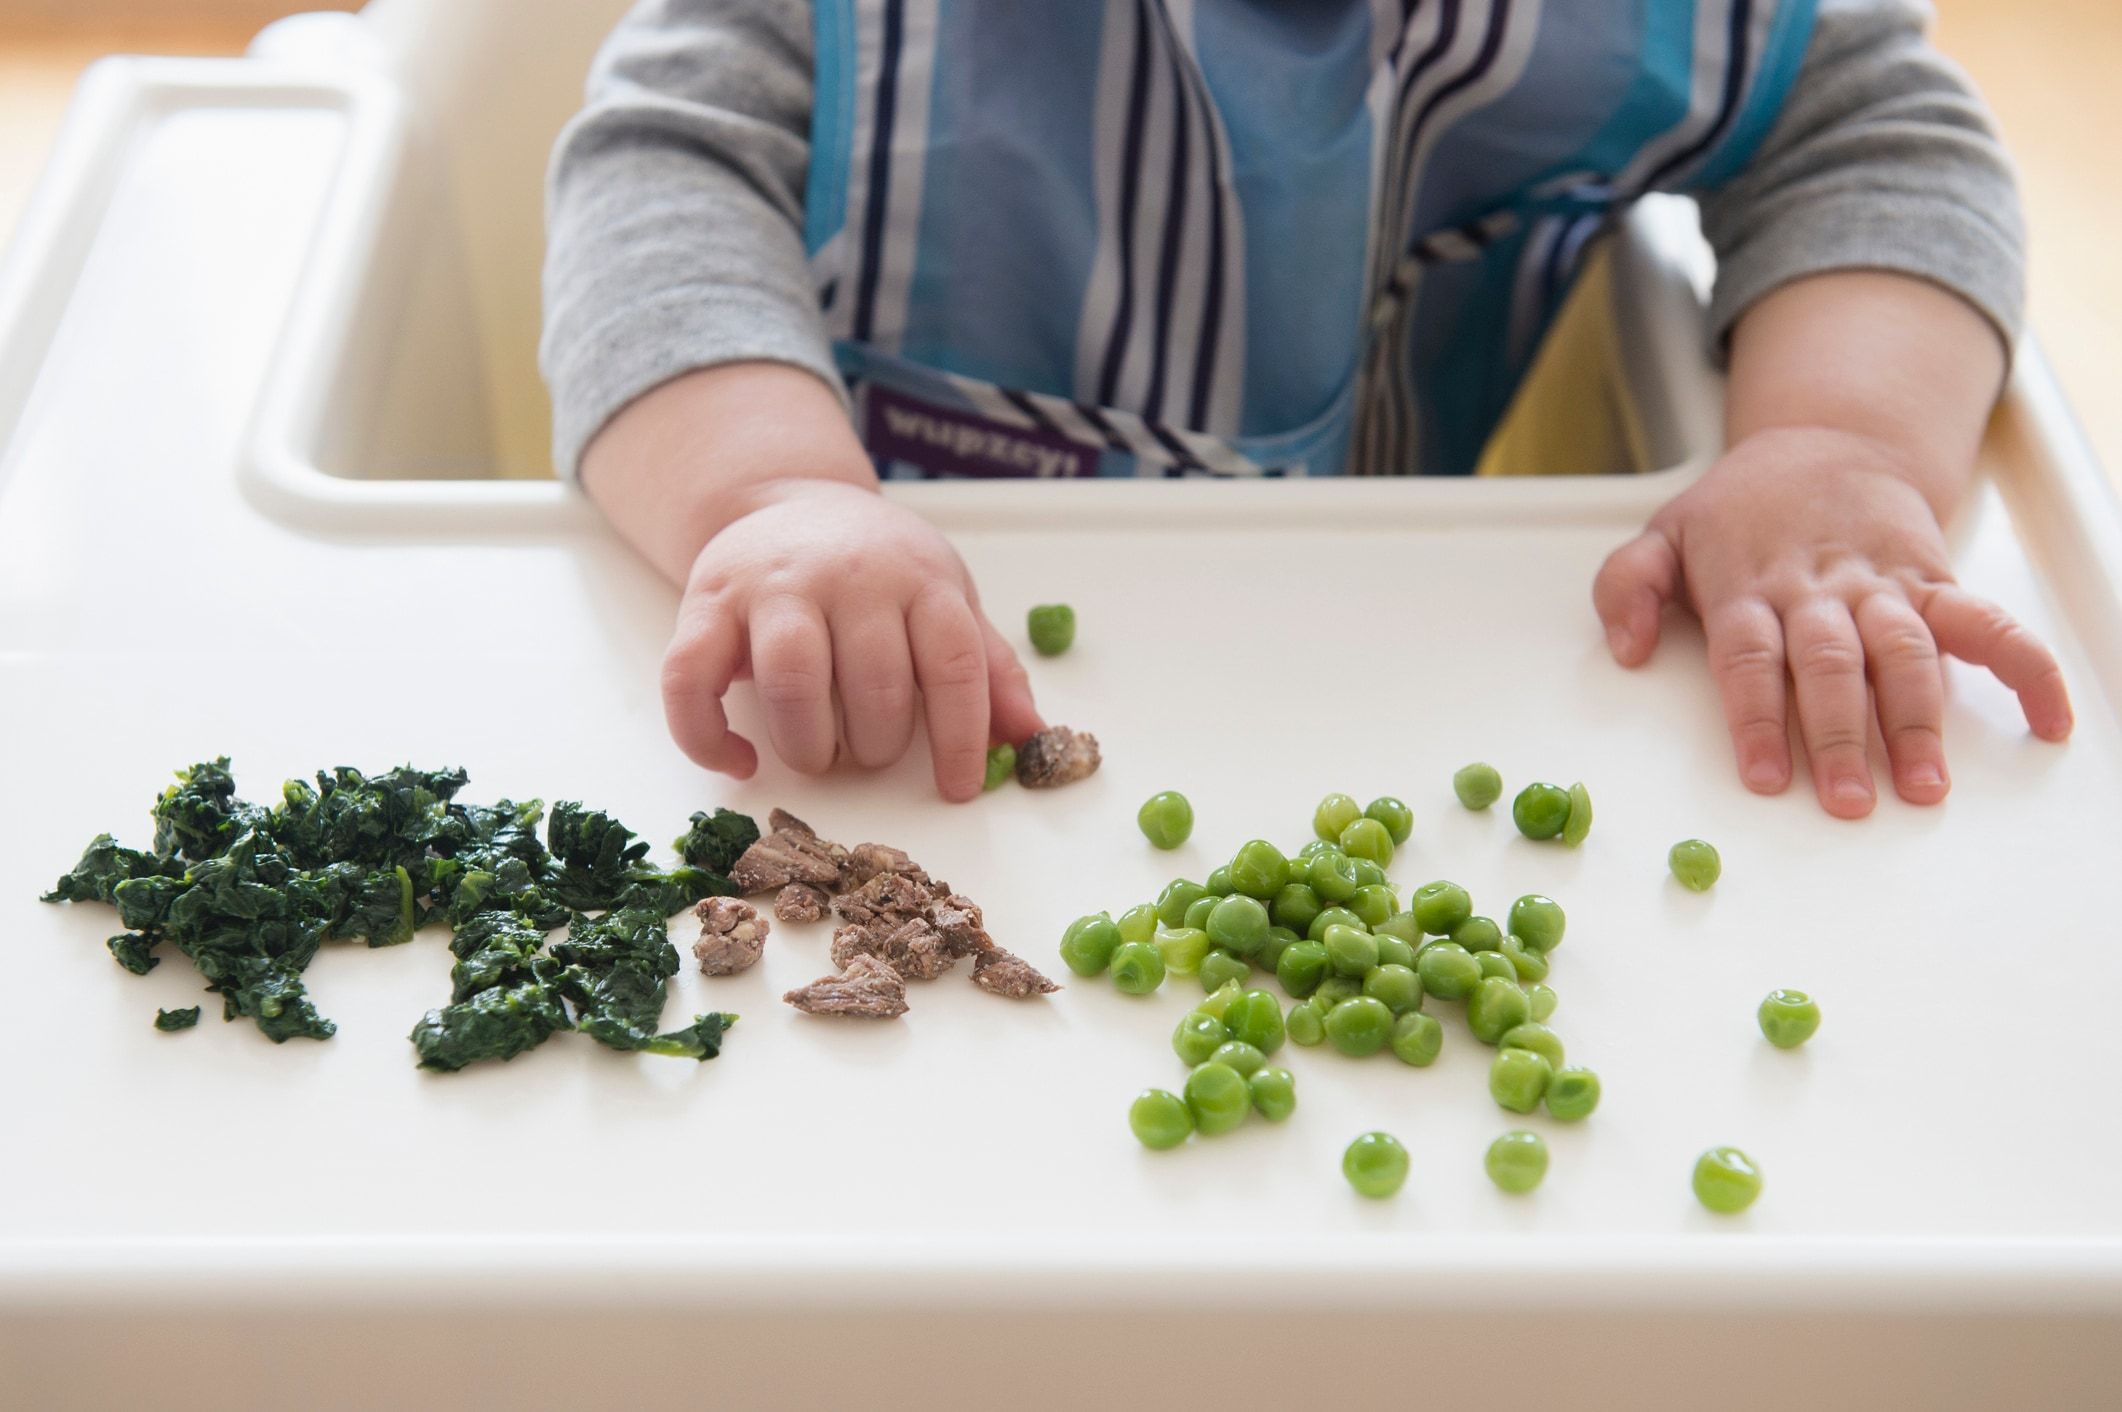 Baby-led weaning: 10 tips to get you started, Baby & toddler, Feeding  articles & support